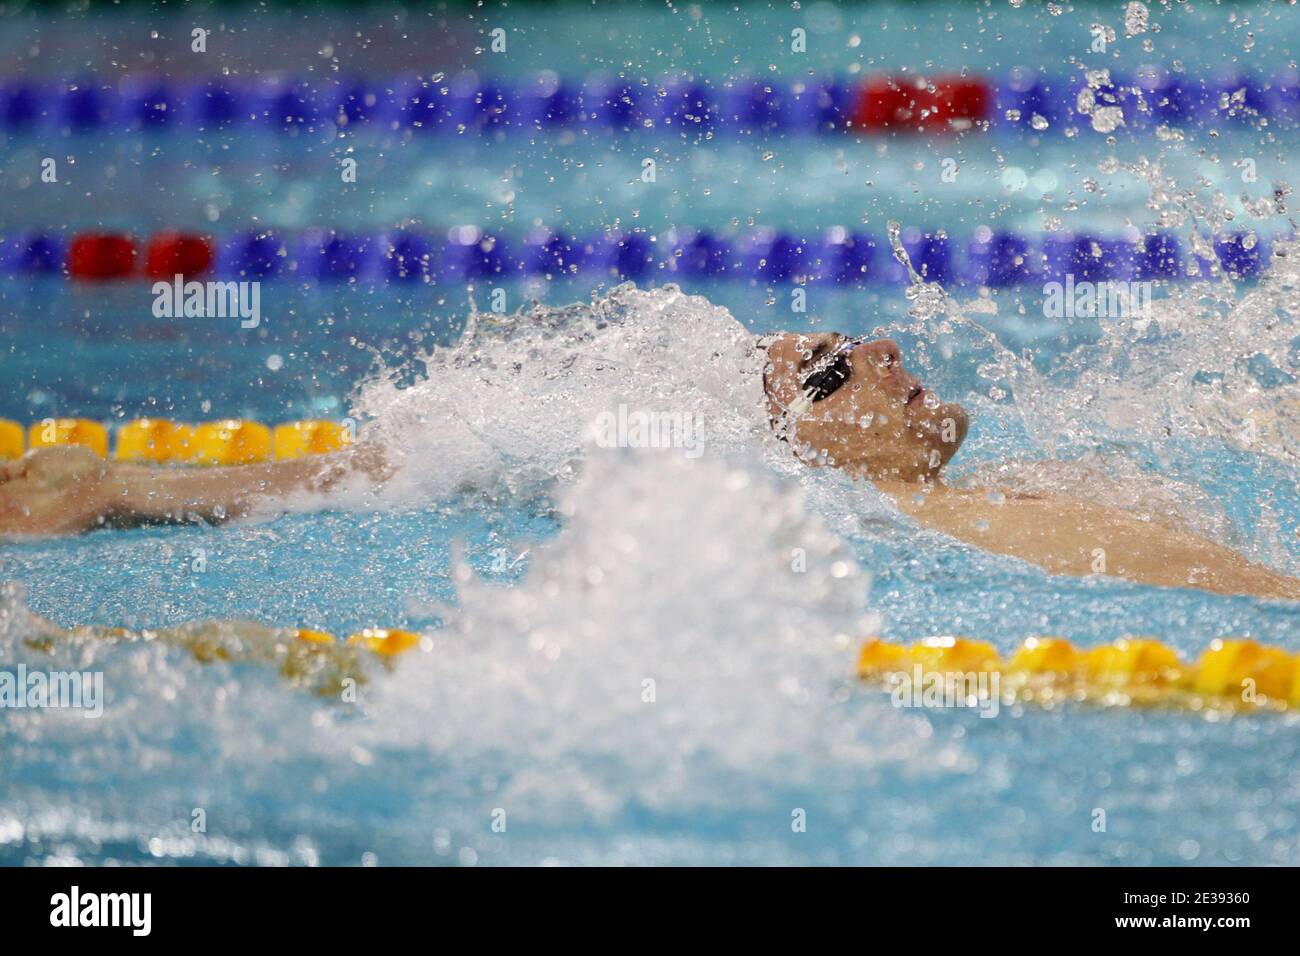 Camille Lacourt of France wins the silver medal in the final of the Men's 100m Backstroke during the 10th FINA World Swimming Championships (25m) at the Hamdan bin Mohammed bin Rashid Sports Complex in Dubai, United Arab Emirates on December 16, 2010. Photo by Ammar Abd Rabbo/ABACAPRESS.COM Stock Photo